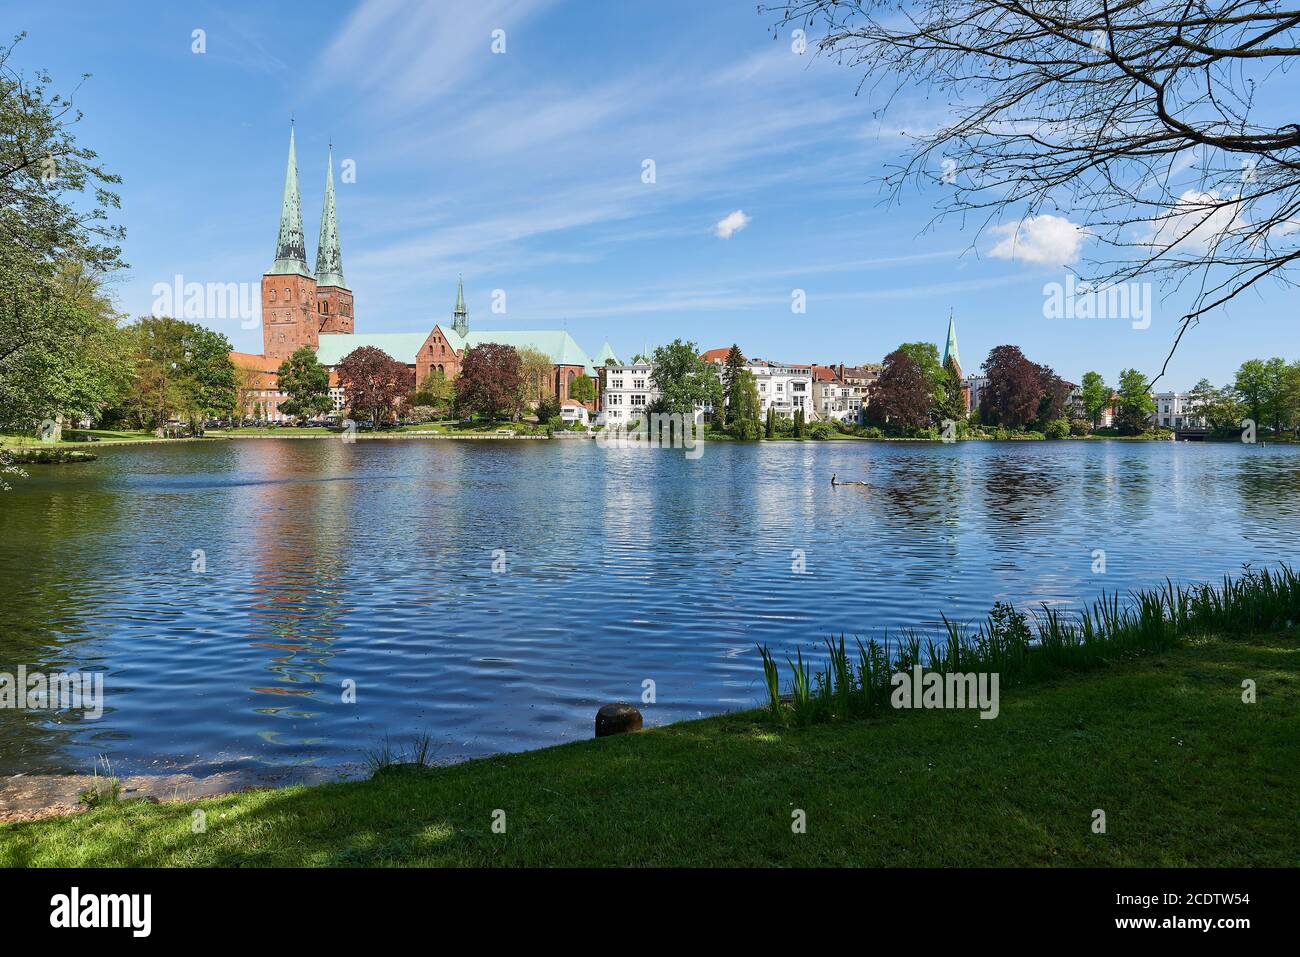 Cathedral and Church St. Aegidien, Lübeck, Germany Stock Photo